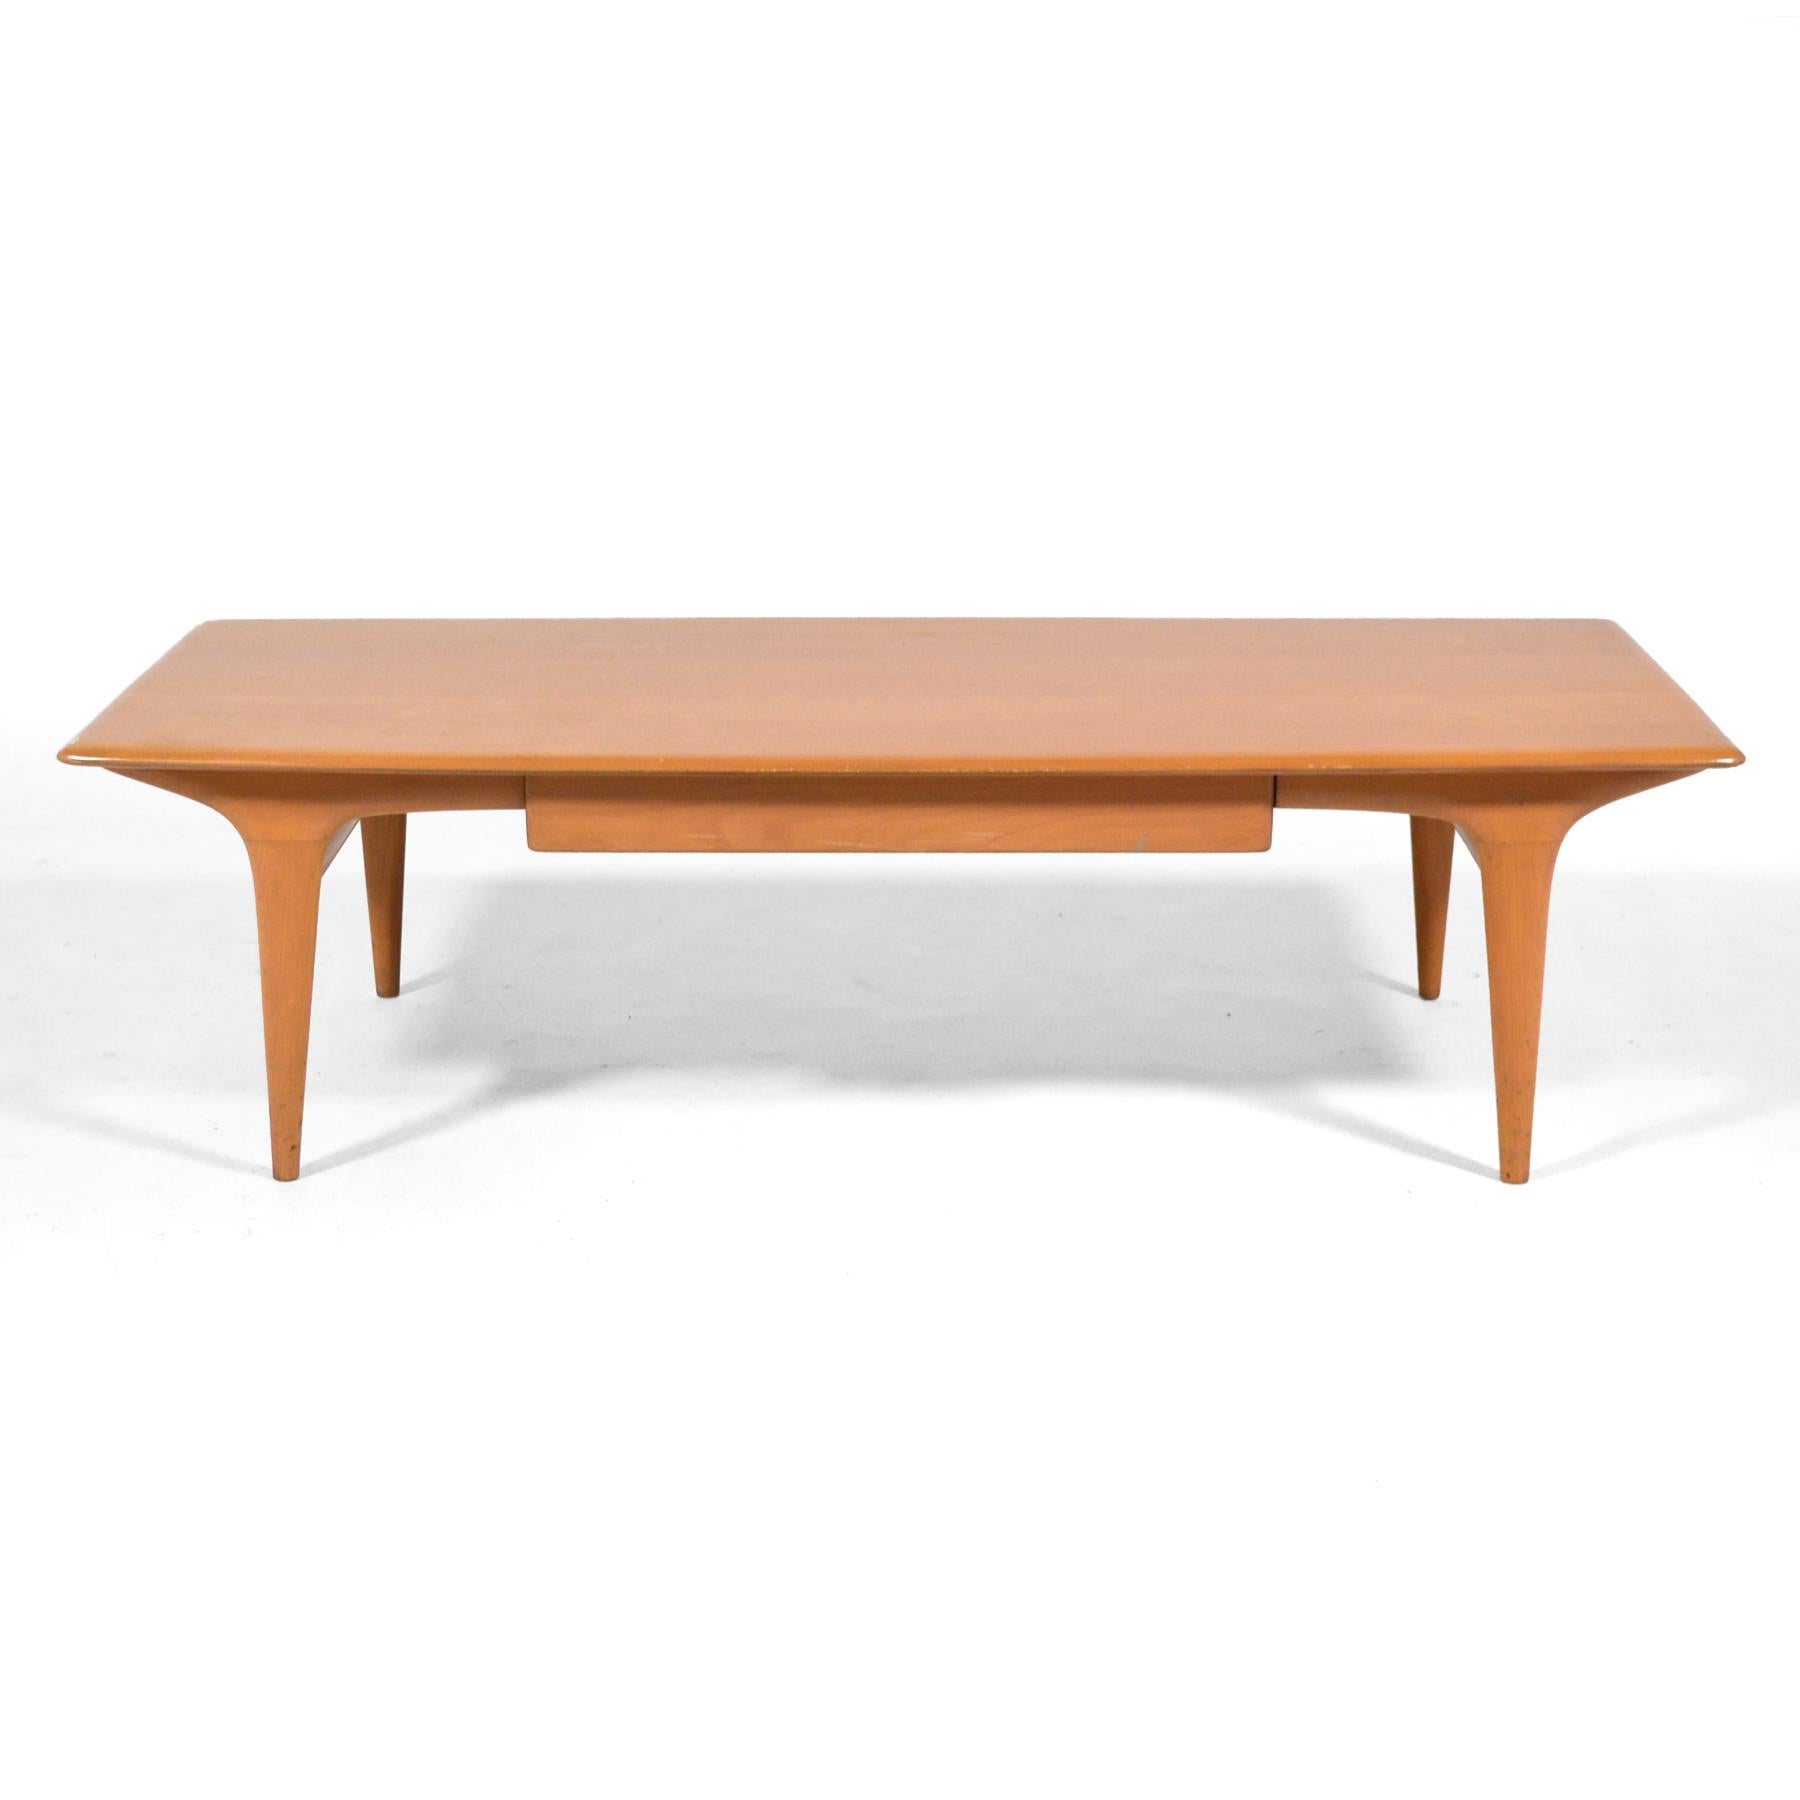 Mid-20th Century Heywood Wakefield M1585 Coffee Table For Sale